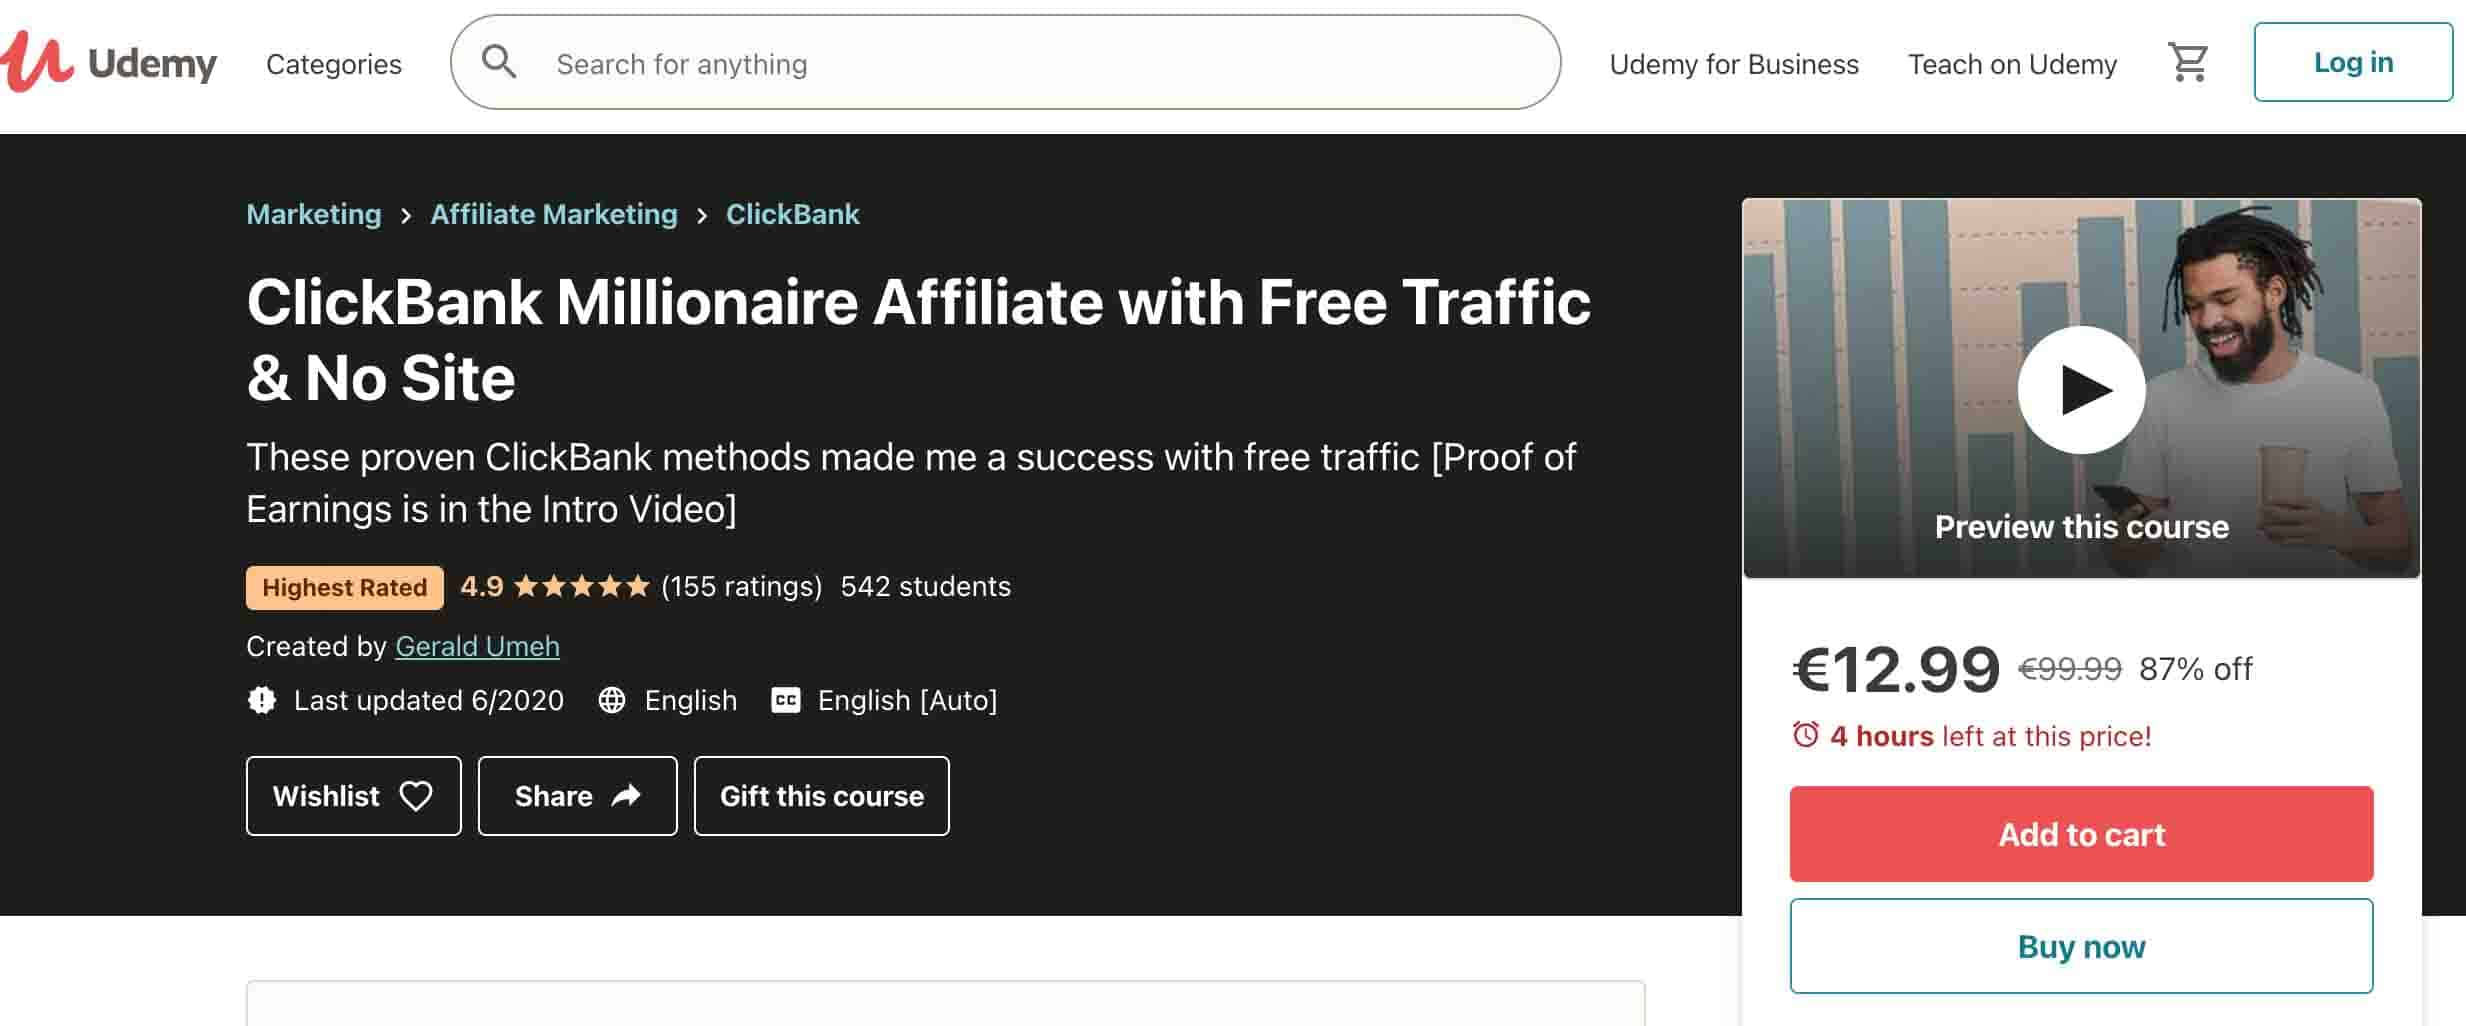 ClickBank Millionaire Affiliate with Free Traffic & No Site